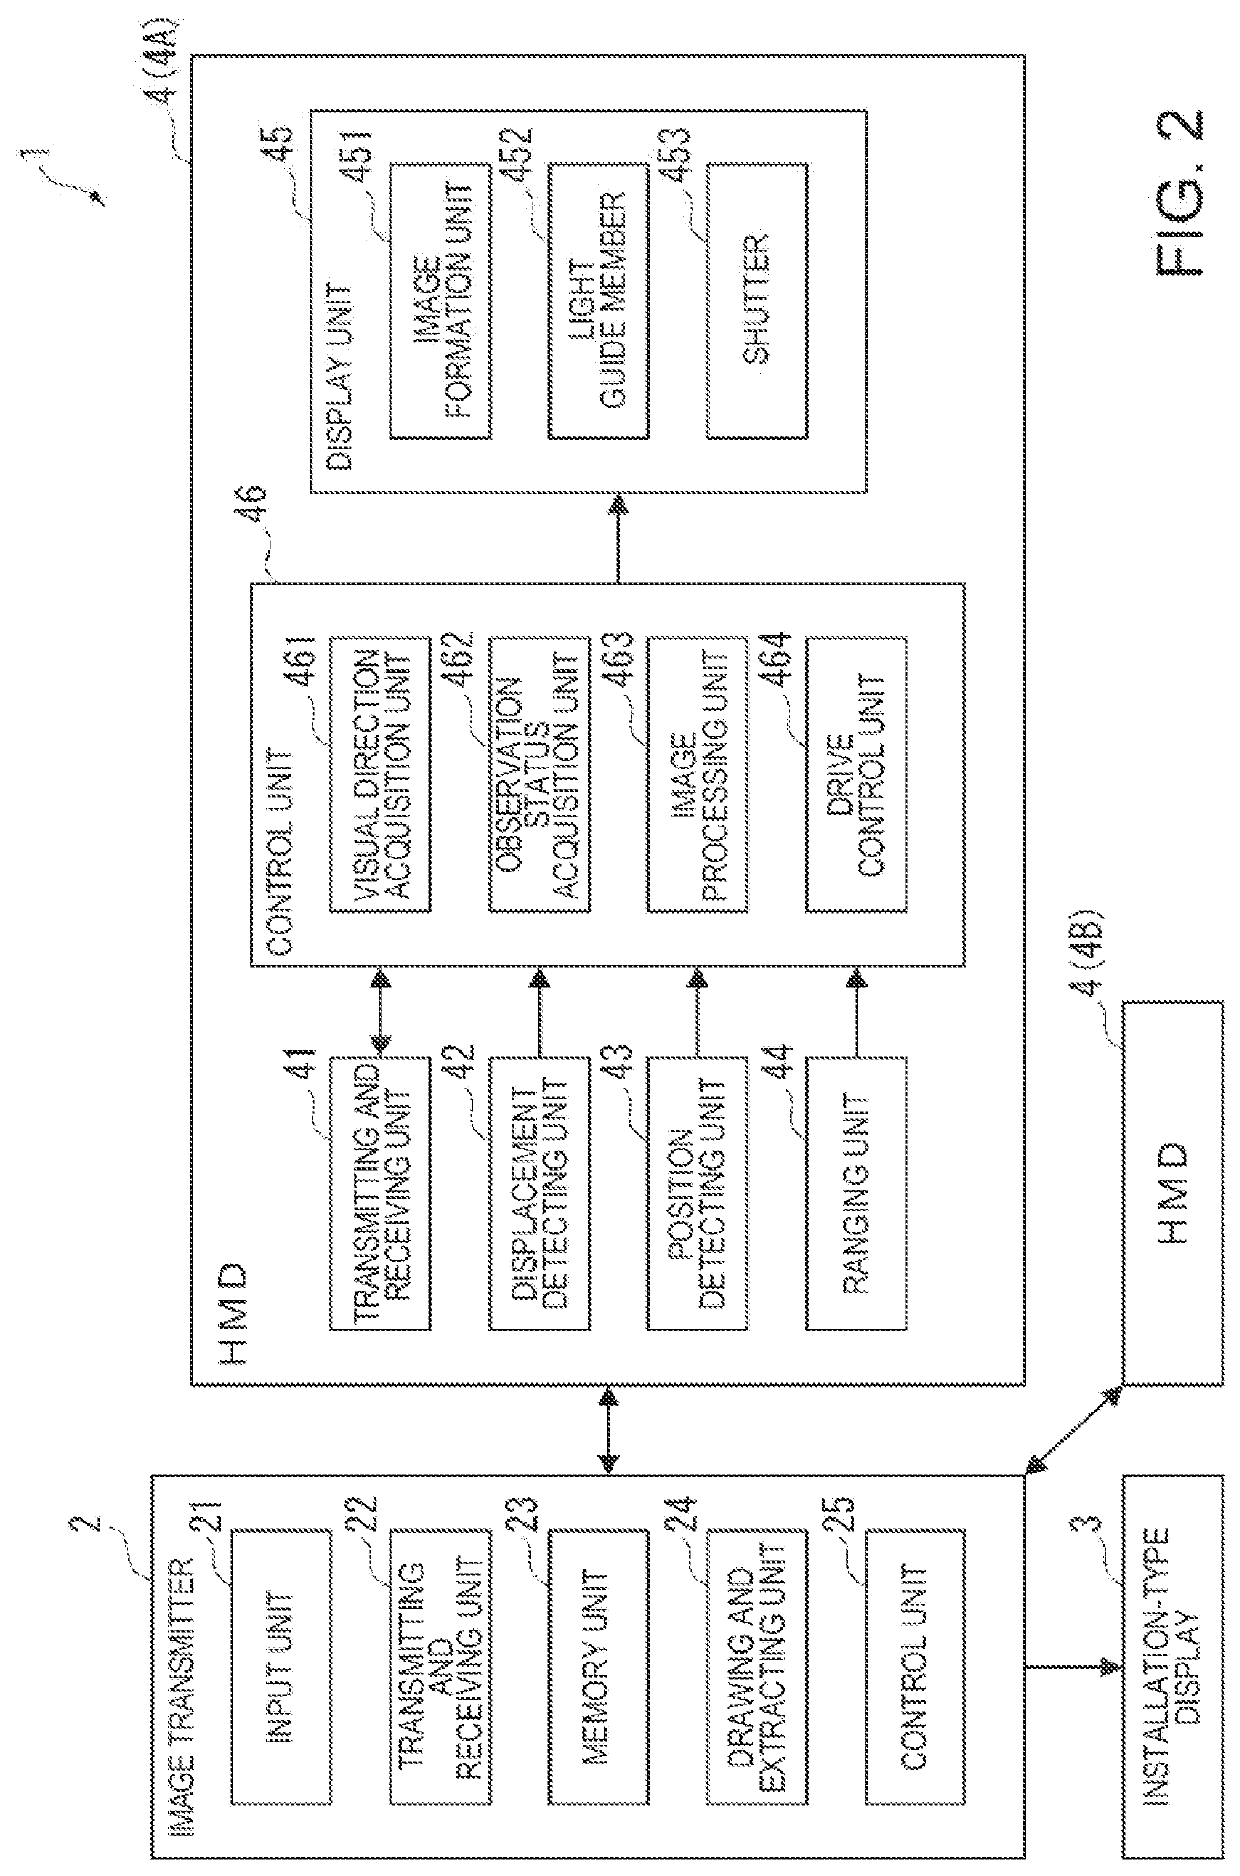 Image display system and head-mounted display device